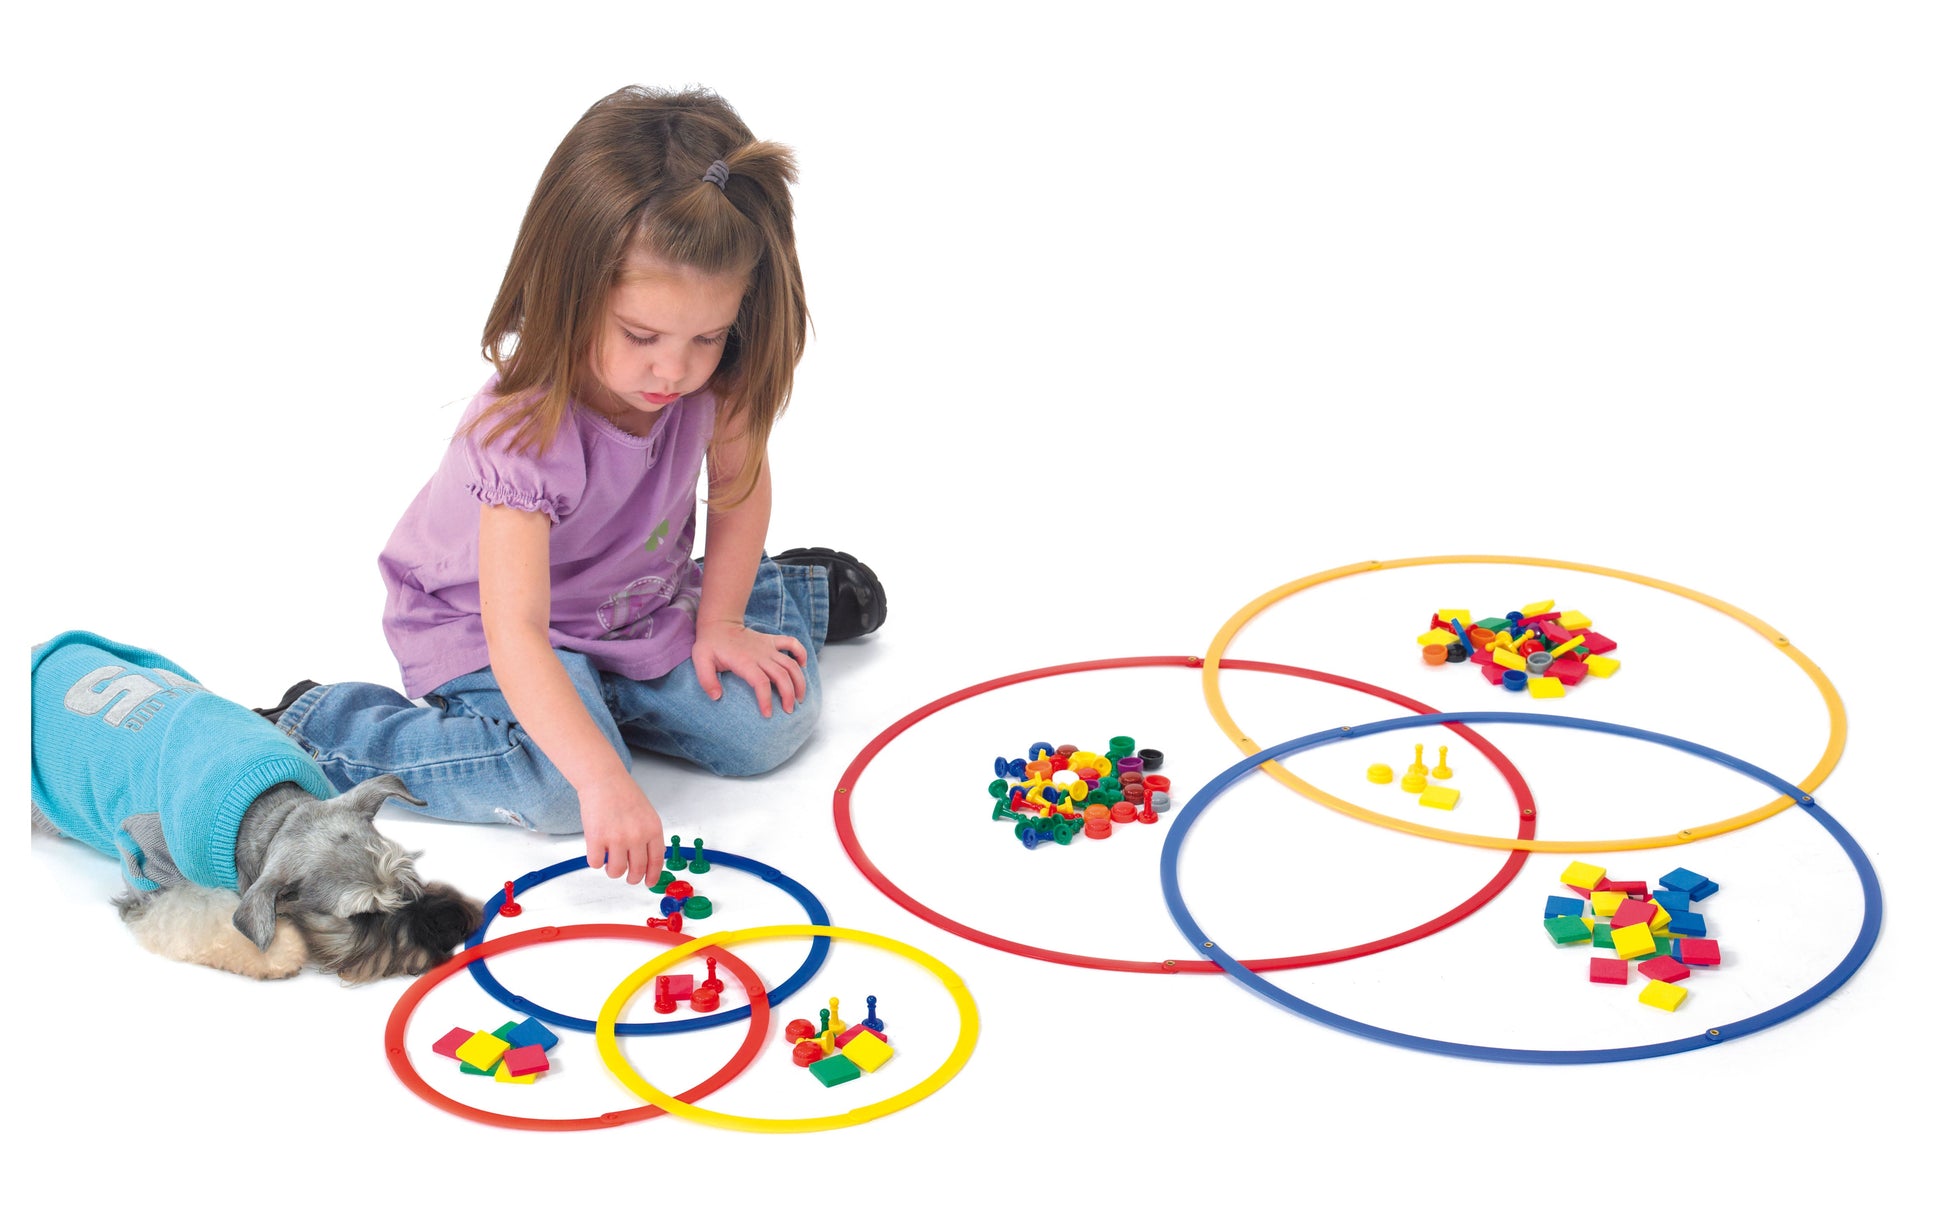 Sorting Rings Set - Pack of 3 Rings | Learning and Exploring Through Play